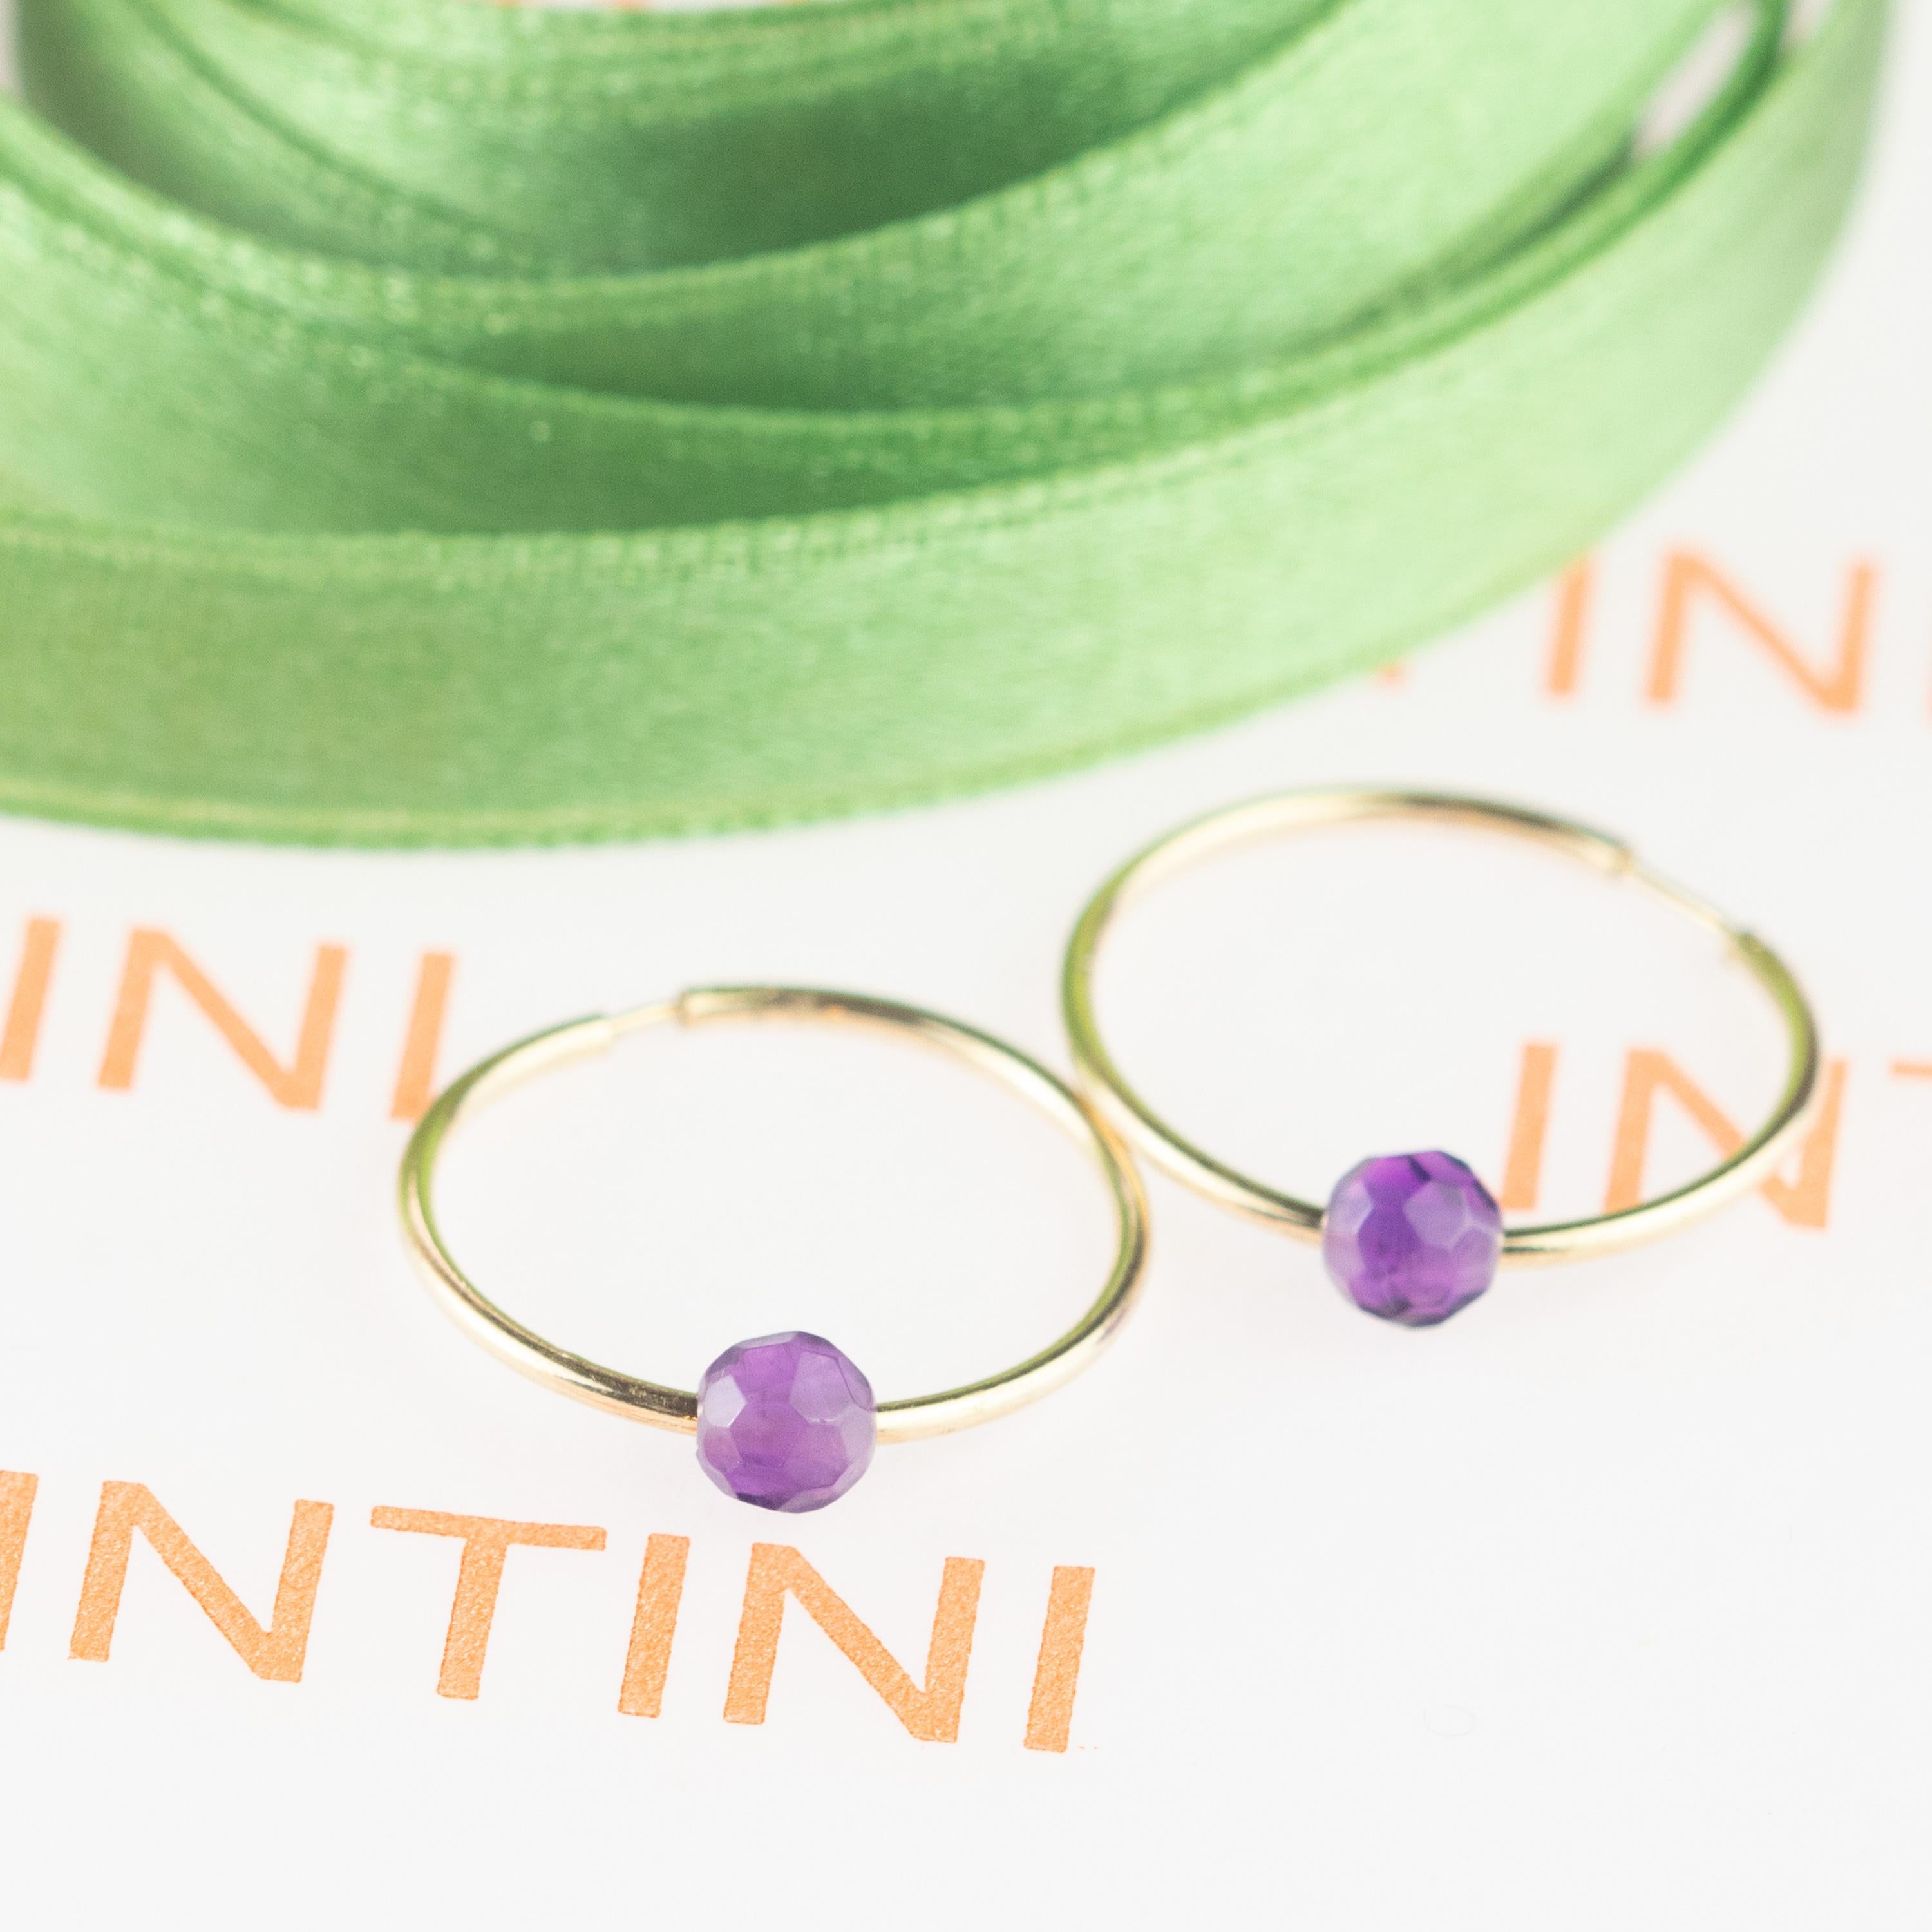 Signature INTINI Jewels planet earrings. Contemporary earring design in 18k yellow gold with a precious and luminous Amethyst rondelles. Passion and intensity mixed in one jewel. Delight yourself with a strong, minimalist design, just for a stunning